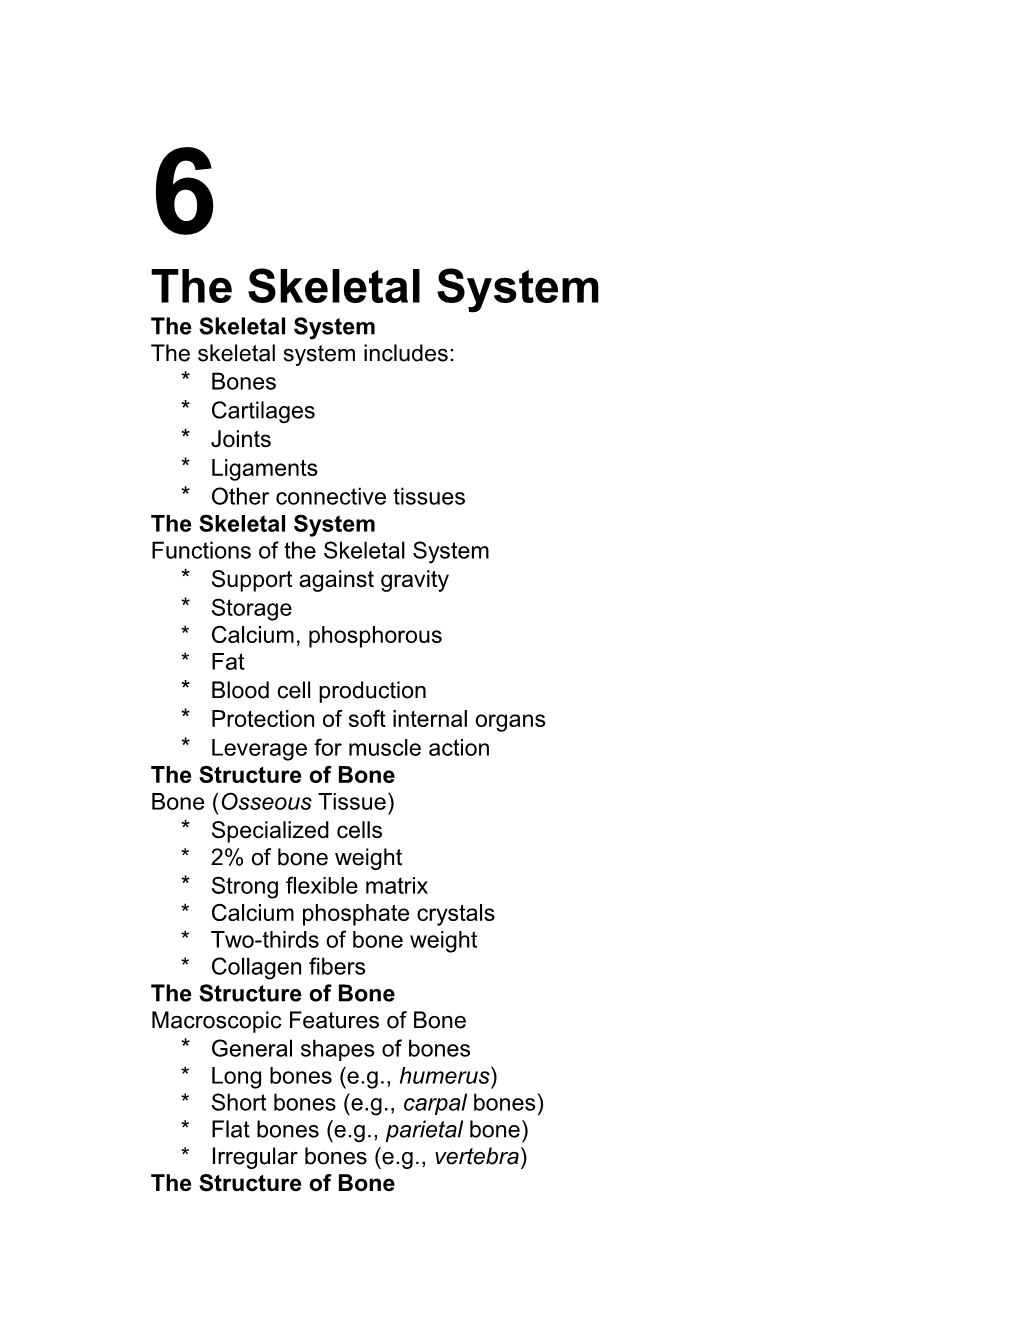 The Skeletal System Includes